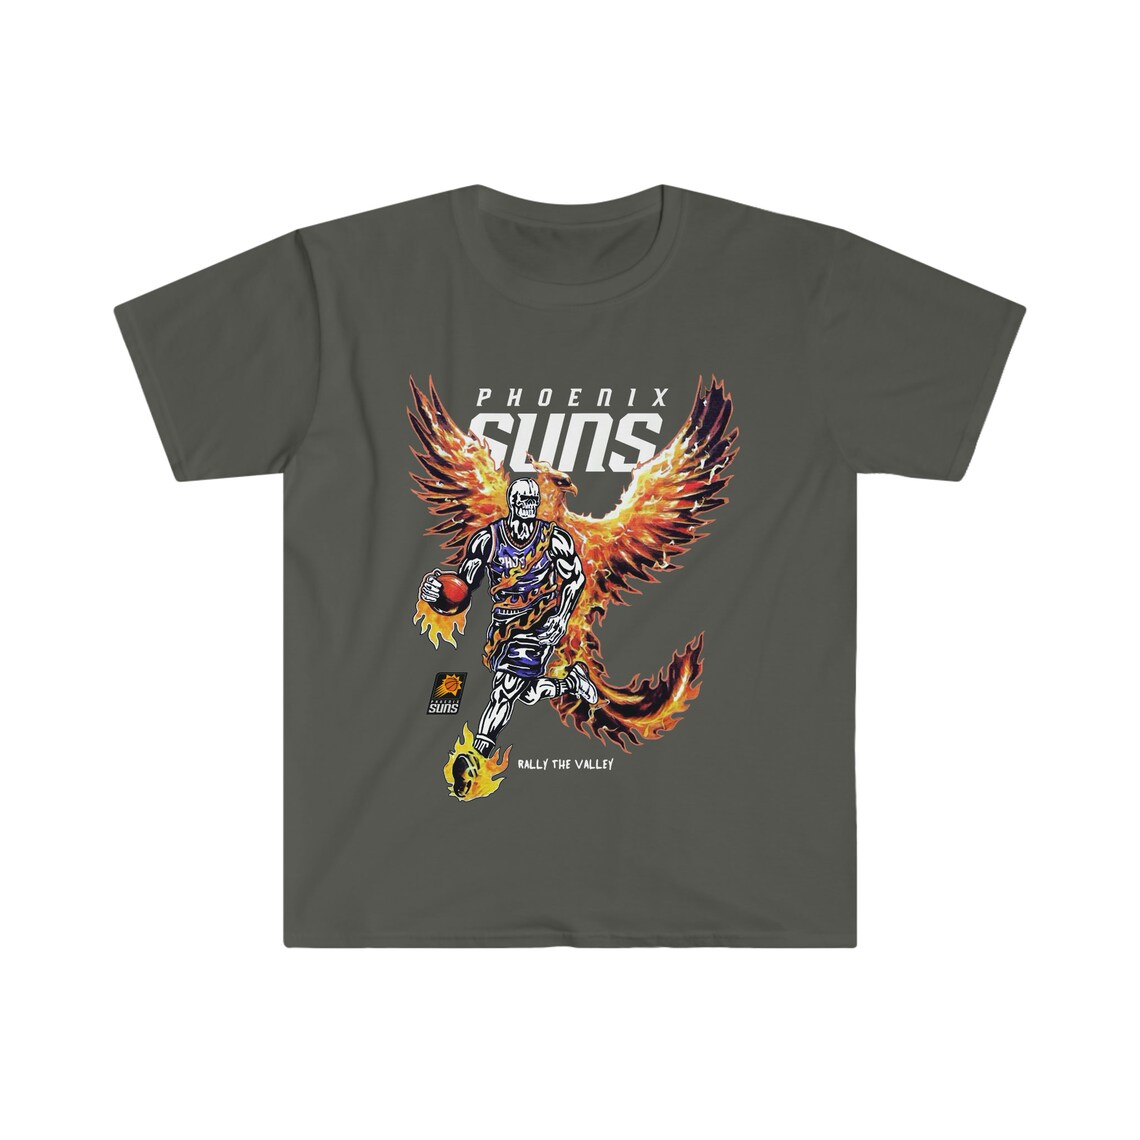 Nike Phoenix Suns fighting spirit collection new 2023 2-sided